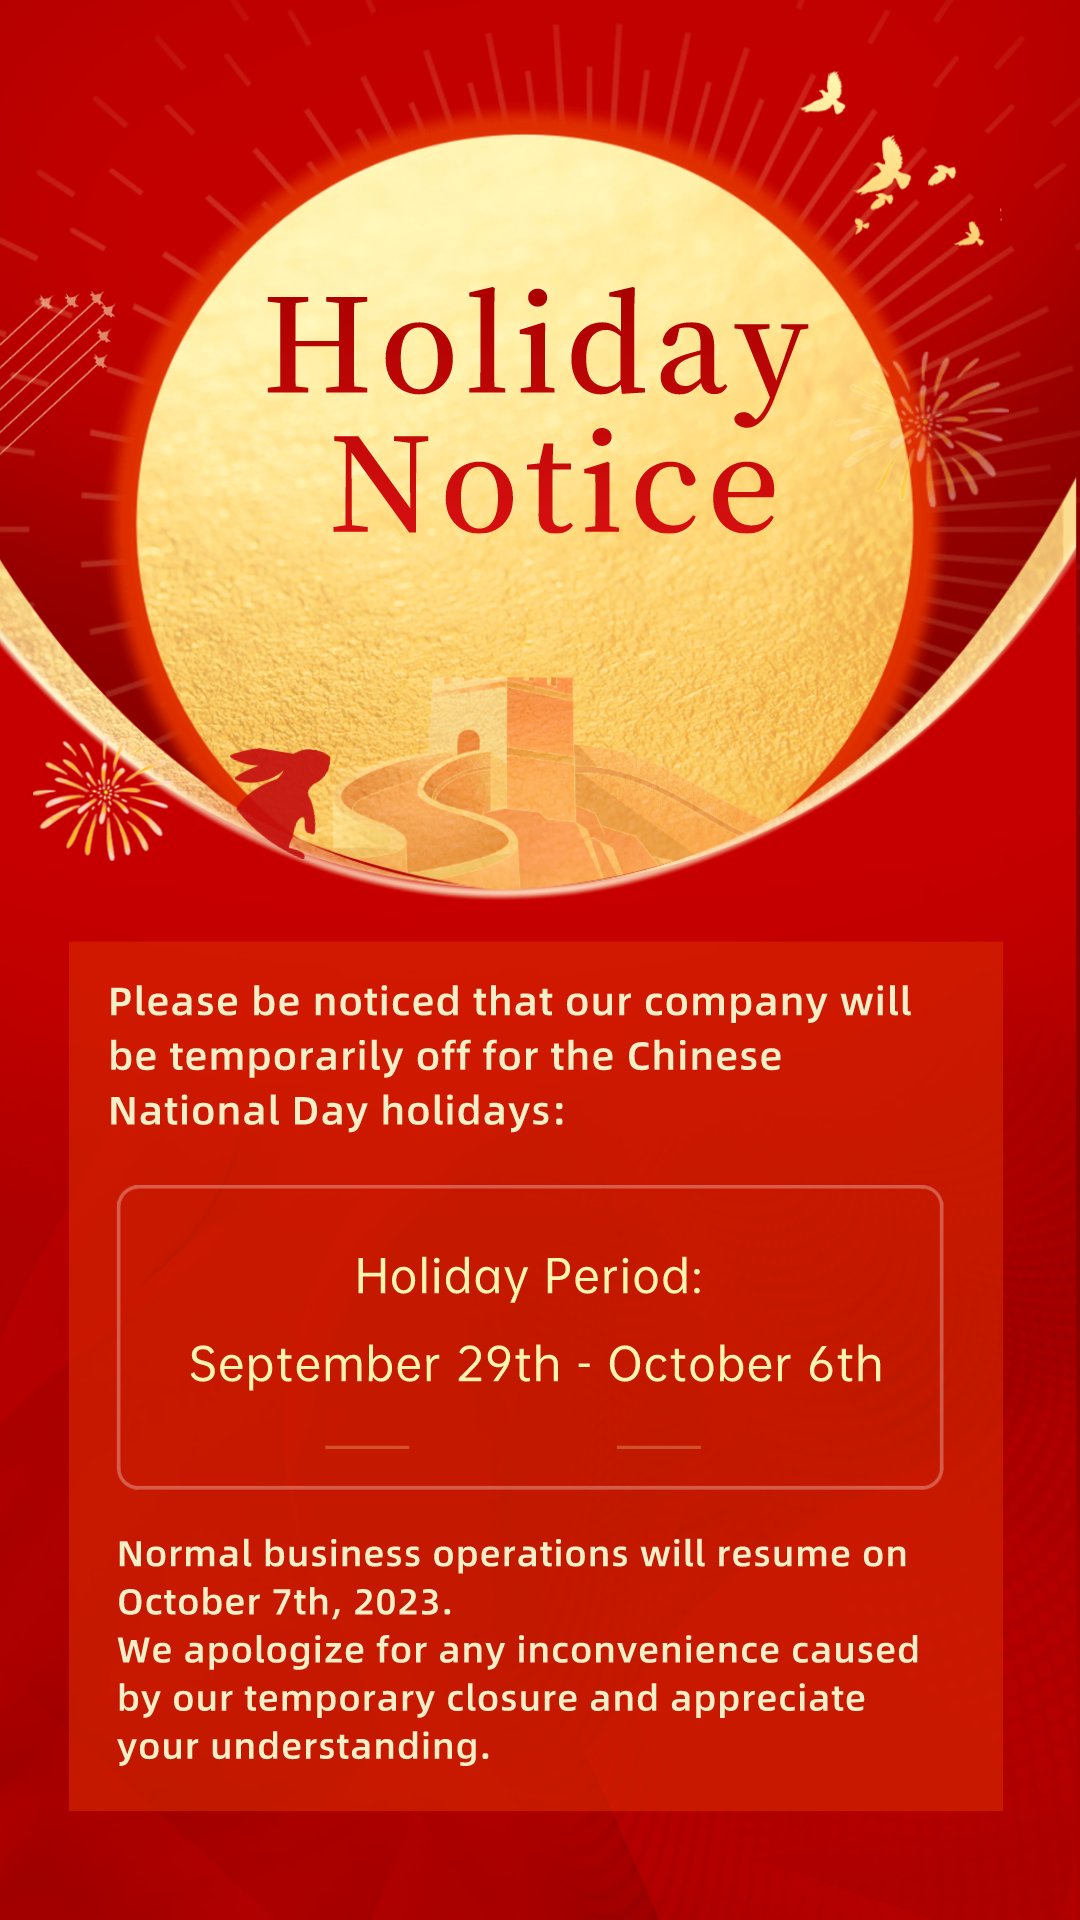 The Information of Our Company holiday